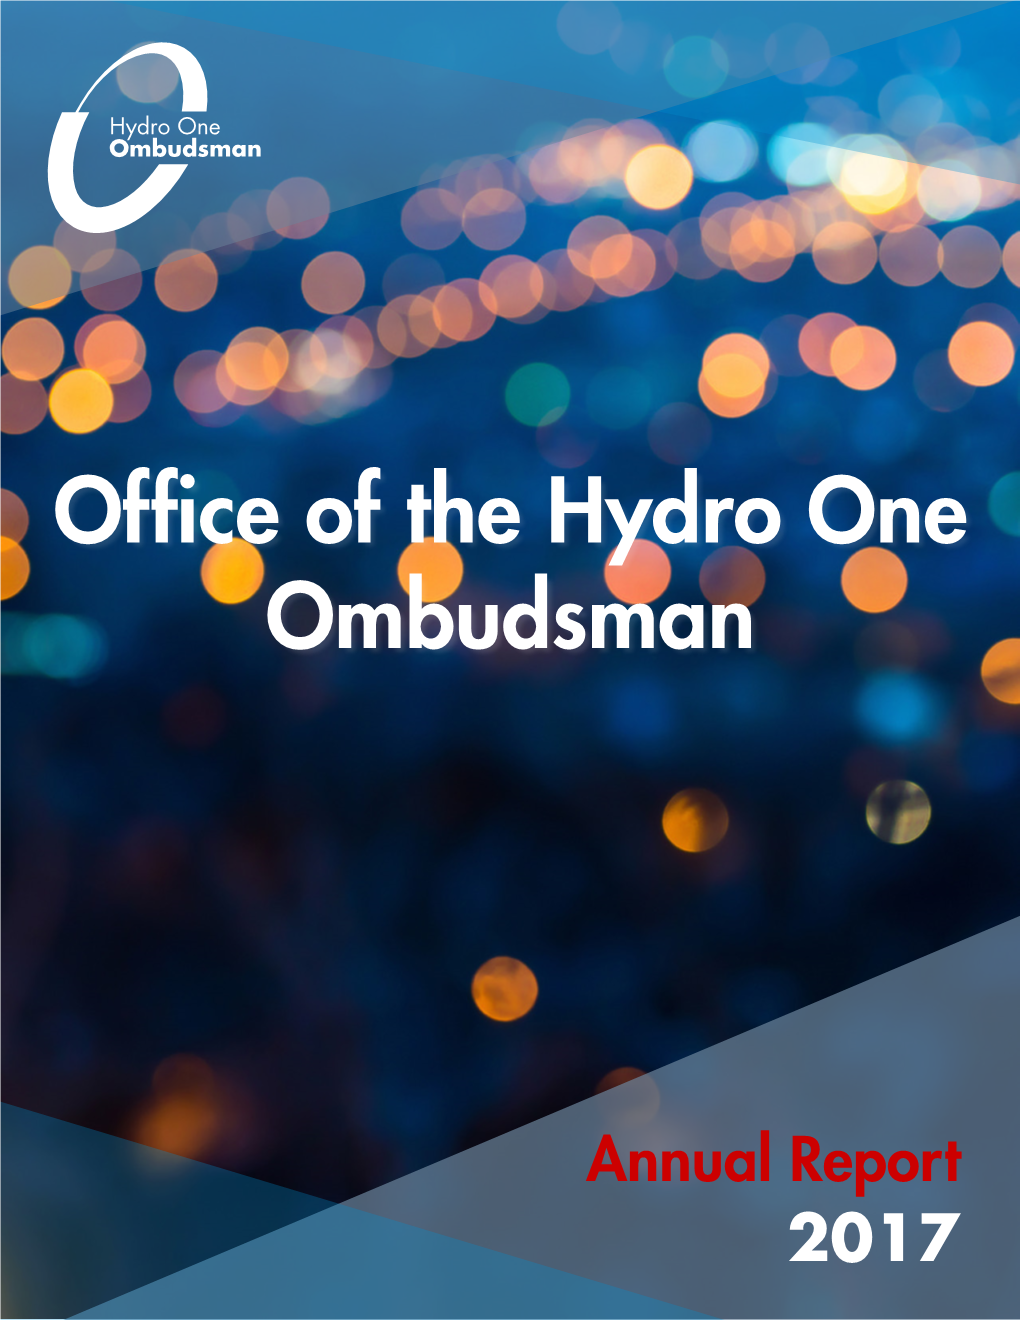 Office of the Hydro One Ombudsman